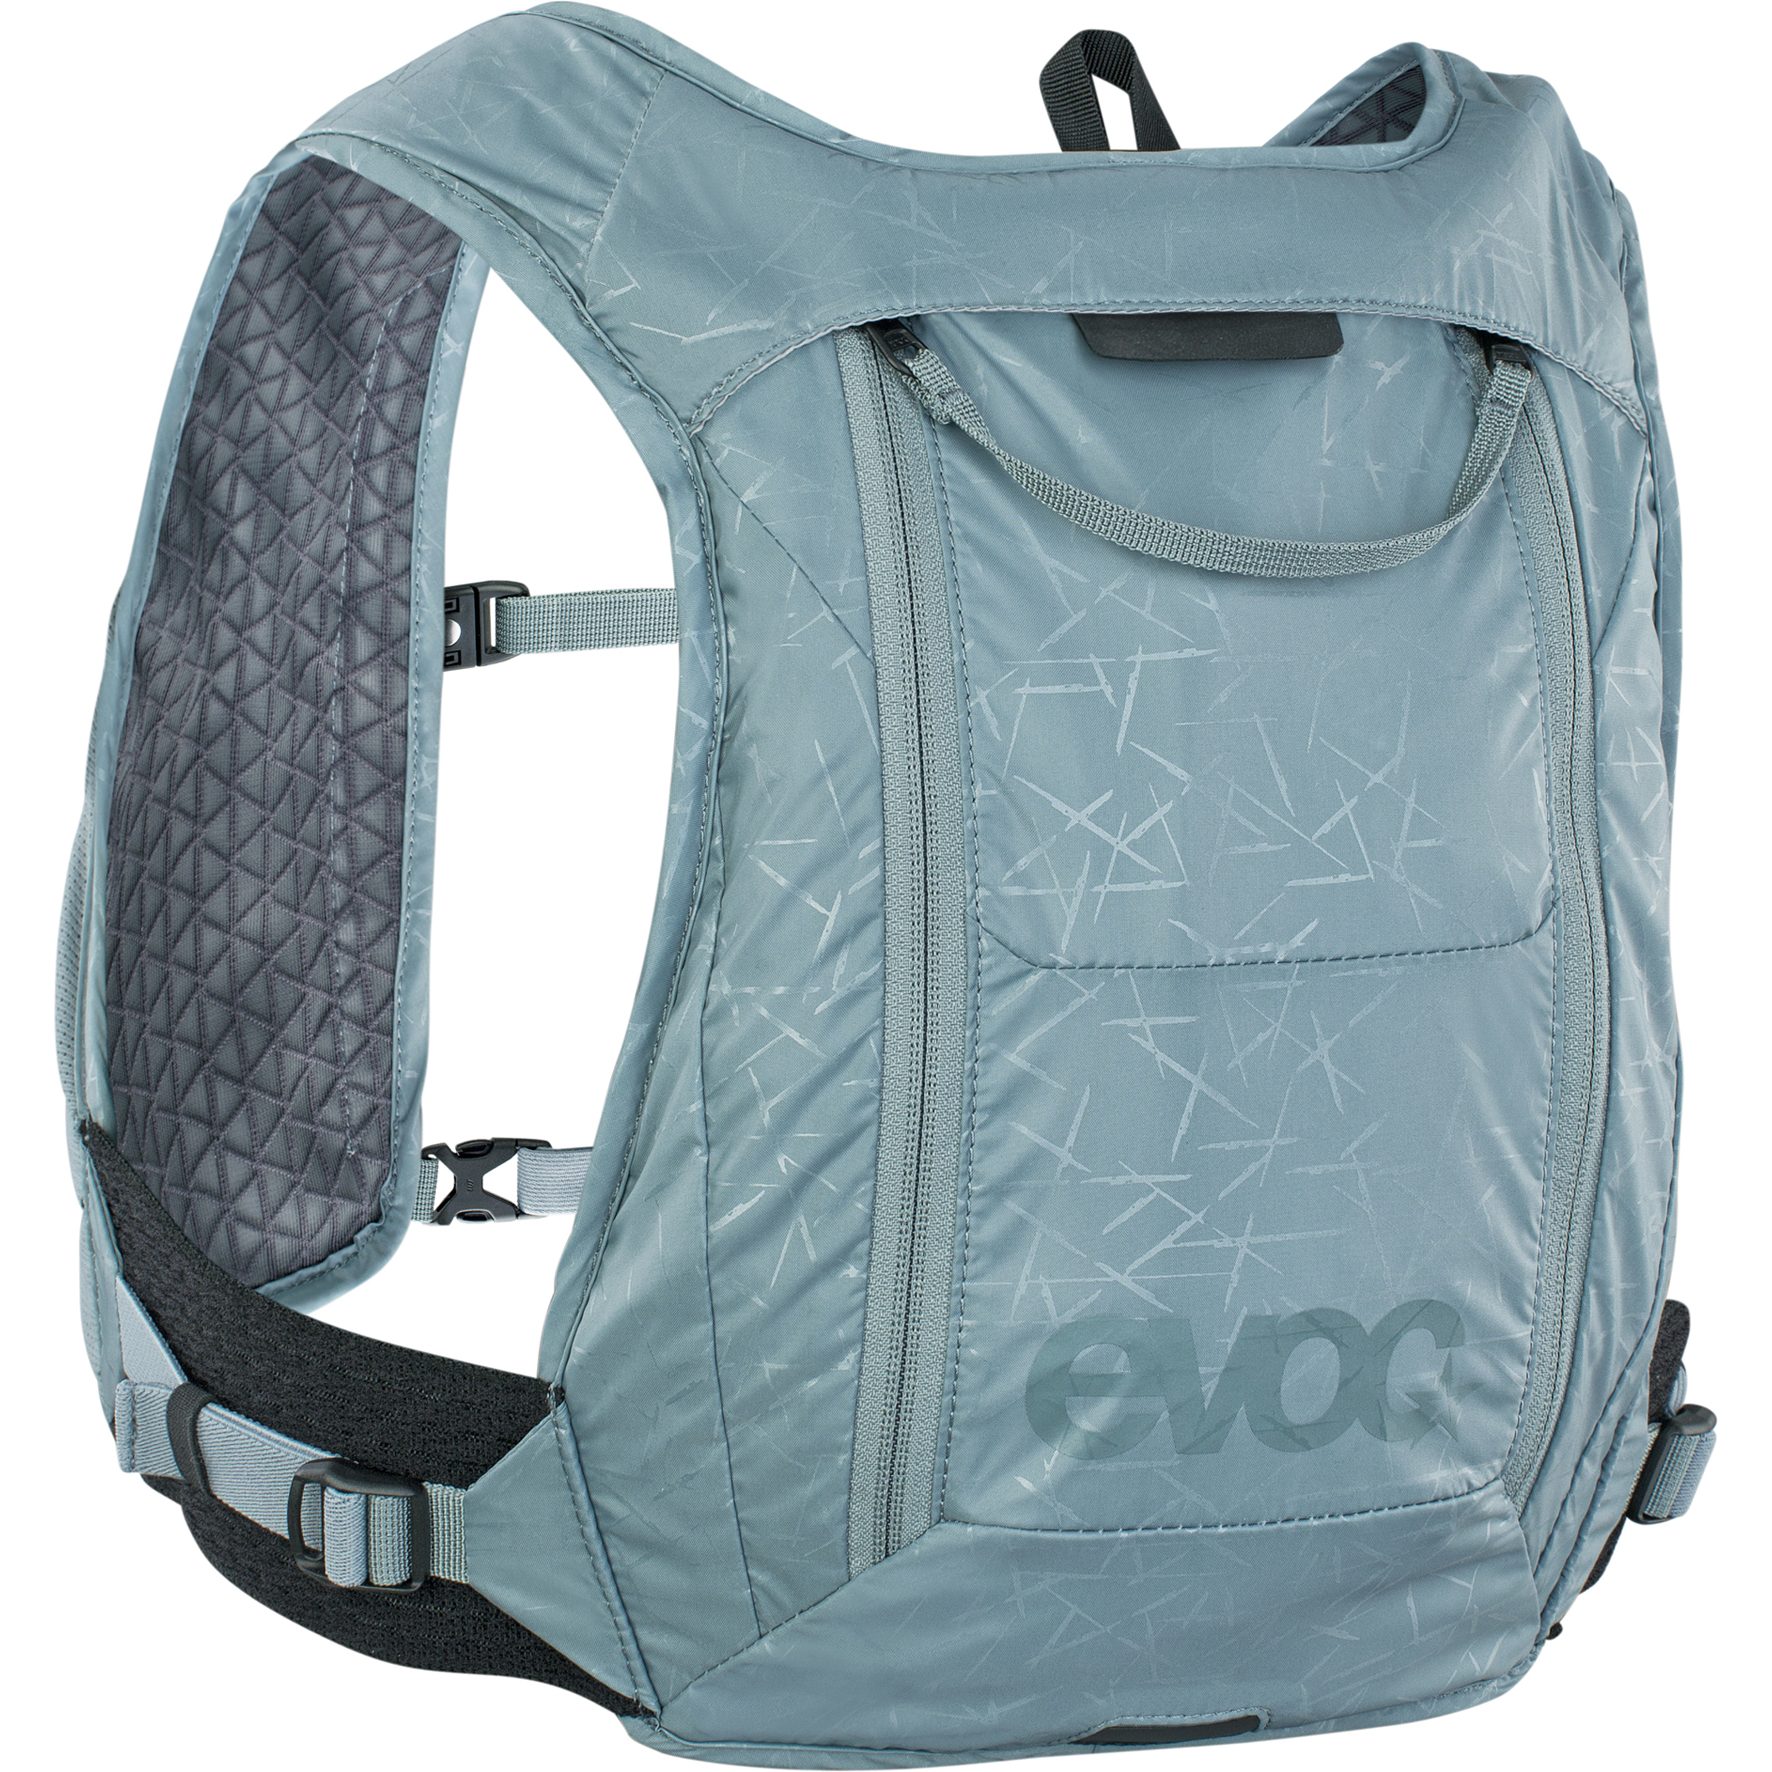 Picture of EVOC Hydro Pro 1.5L Backpack + 1.5L Hydration Bladder - Steel